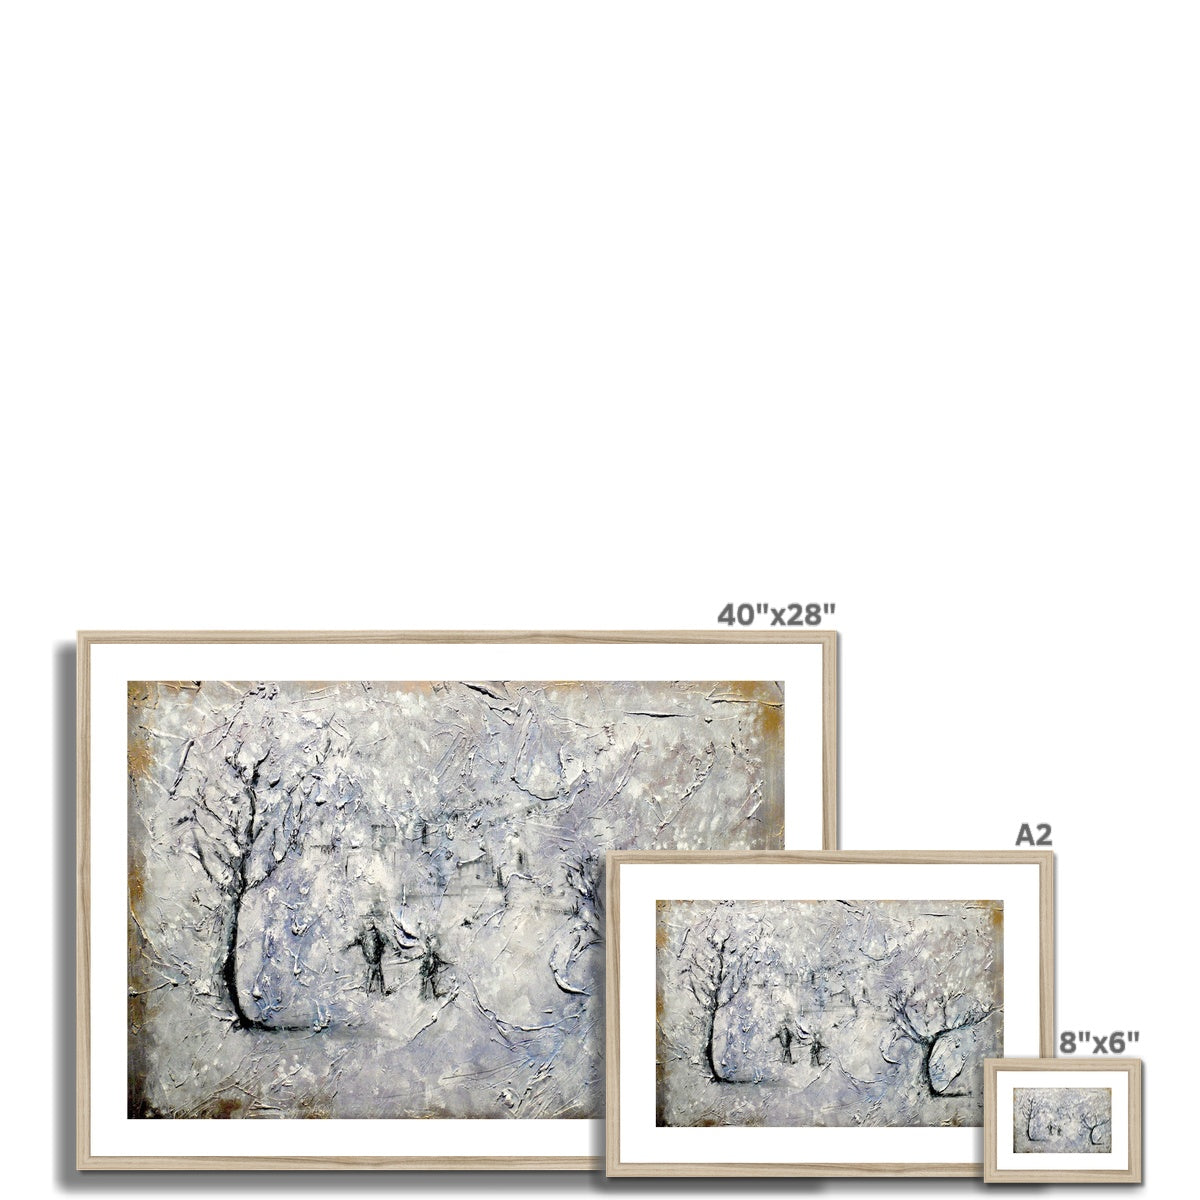 Father Daughter Snow Painting | Framed & Mounted Prints From Scotland-Framed & Mounted Prints-Abstract & Impressionistic Art Gallery-Paintings, Prints, Homeware, Art Gifts From Scotland By Scottish Artist Kevin Hunter